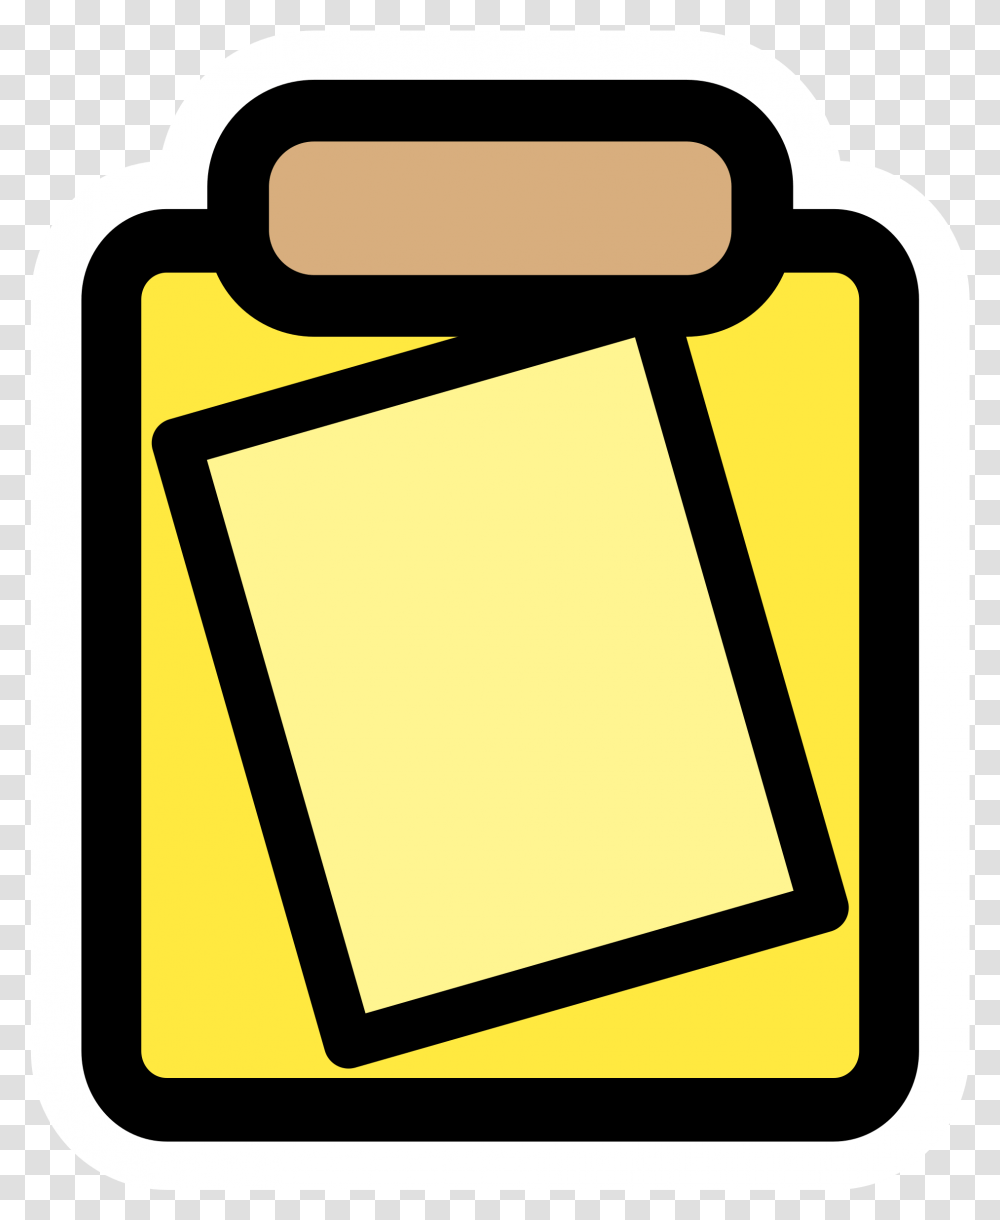 Clipboard Clipart Vectors Download Free Vector Art Theme Computer Icon, Label, Mailbox, Letterbox Transparent Png